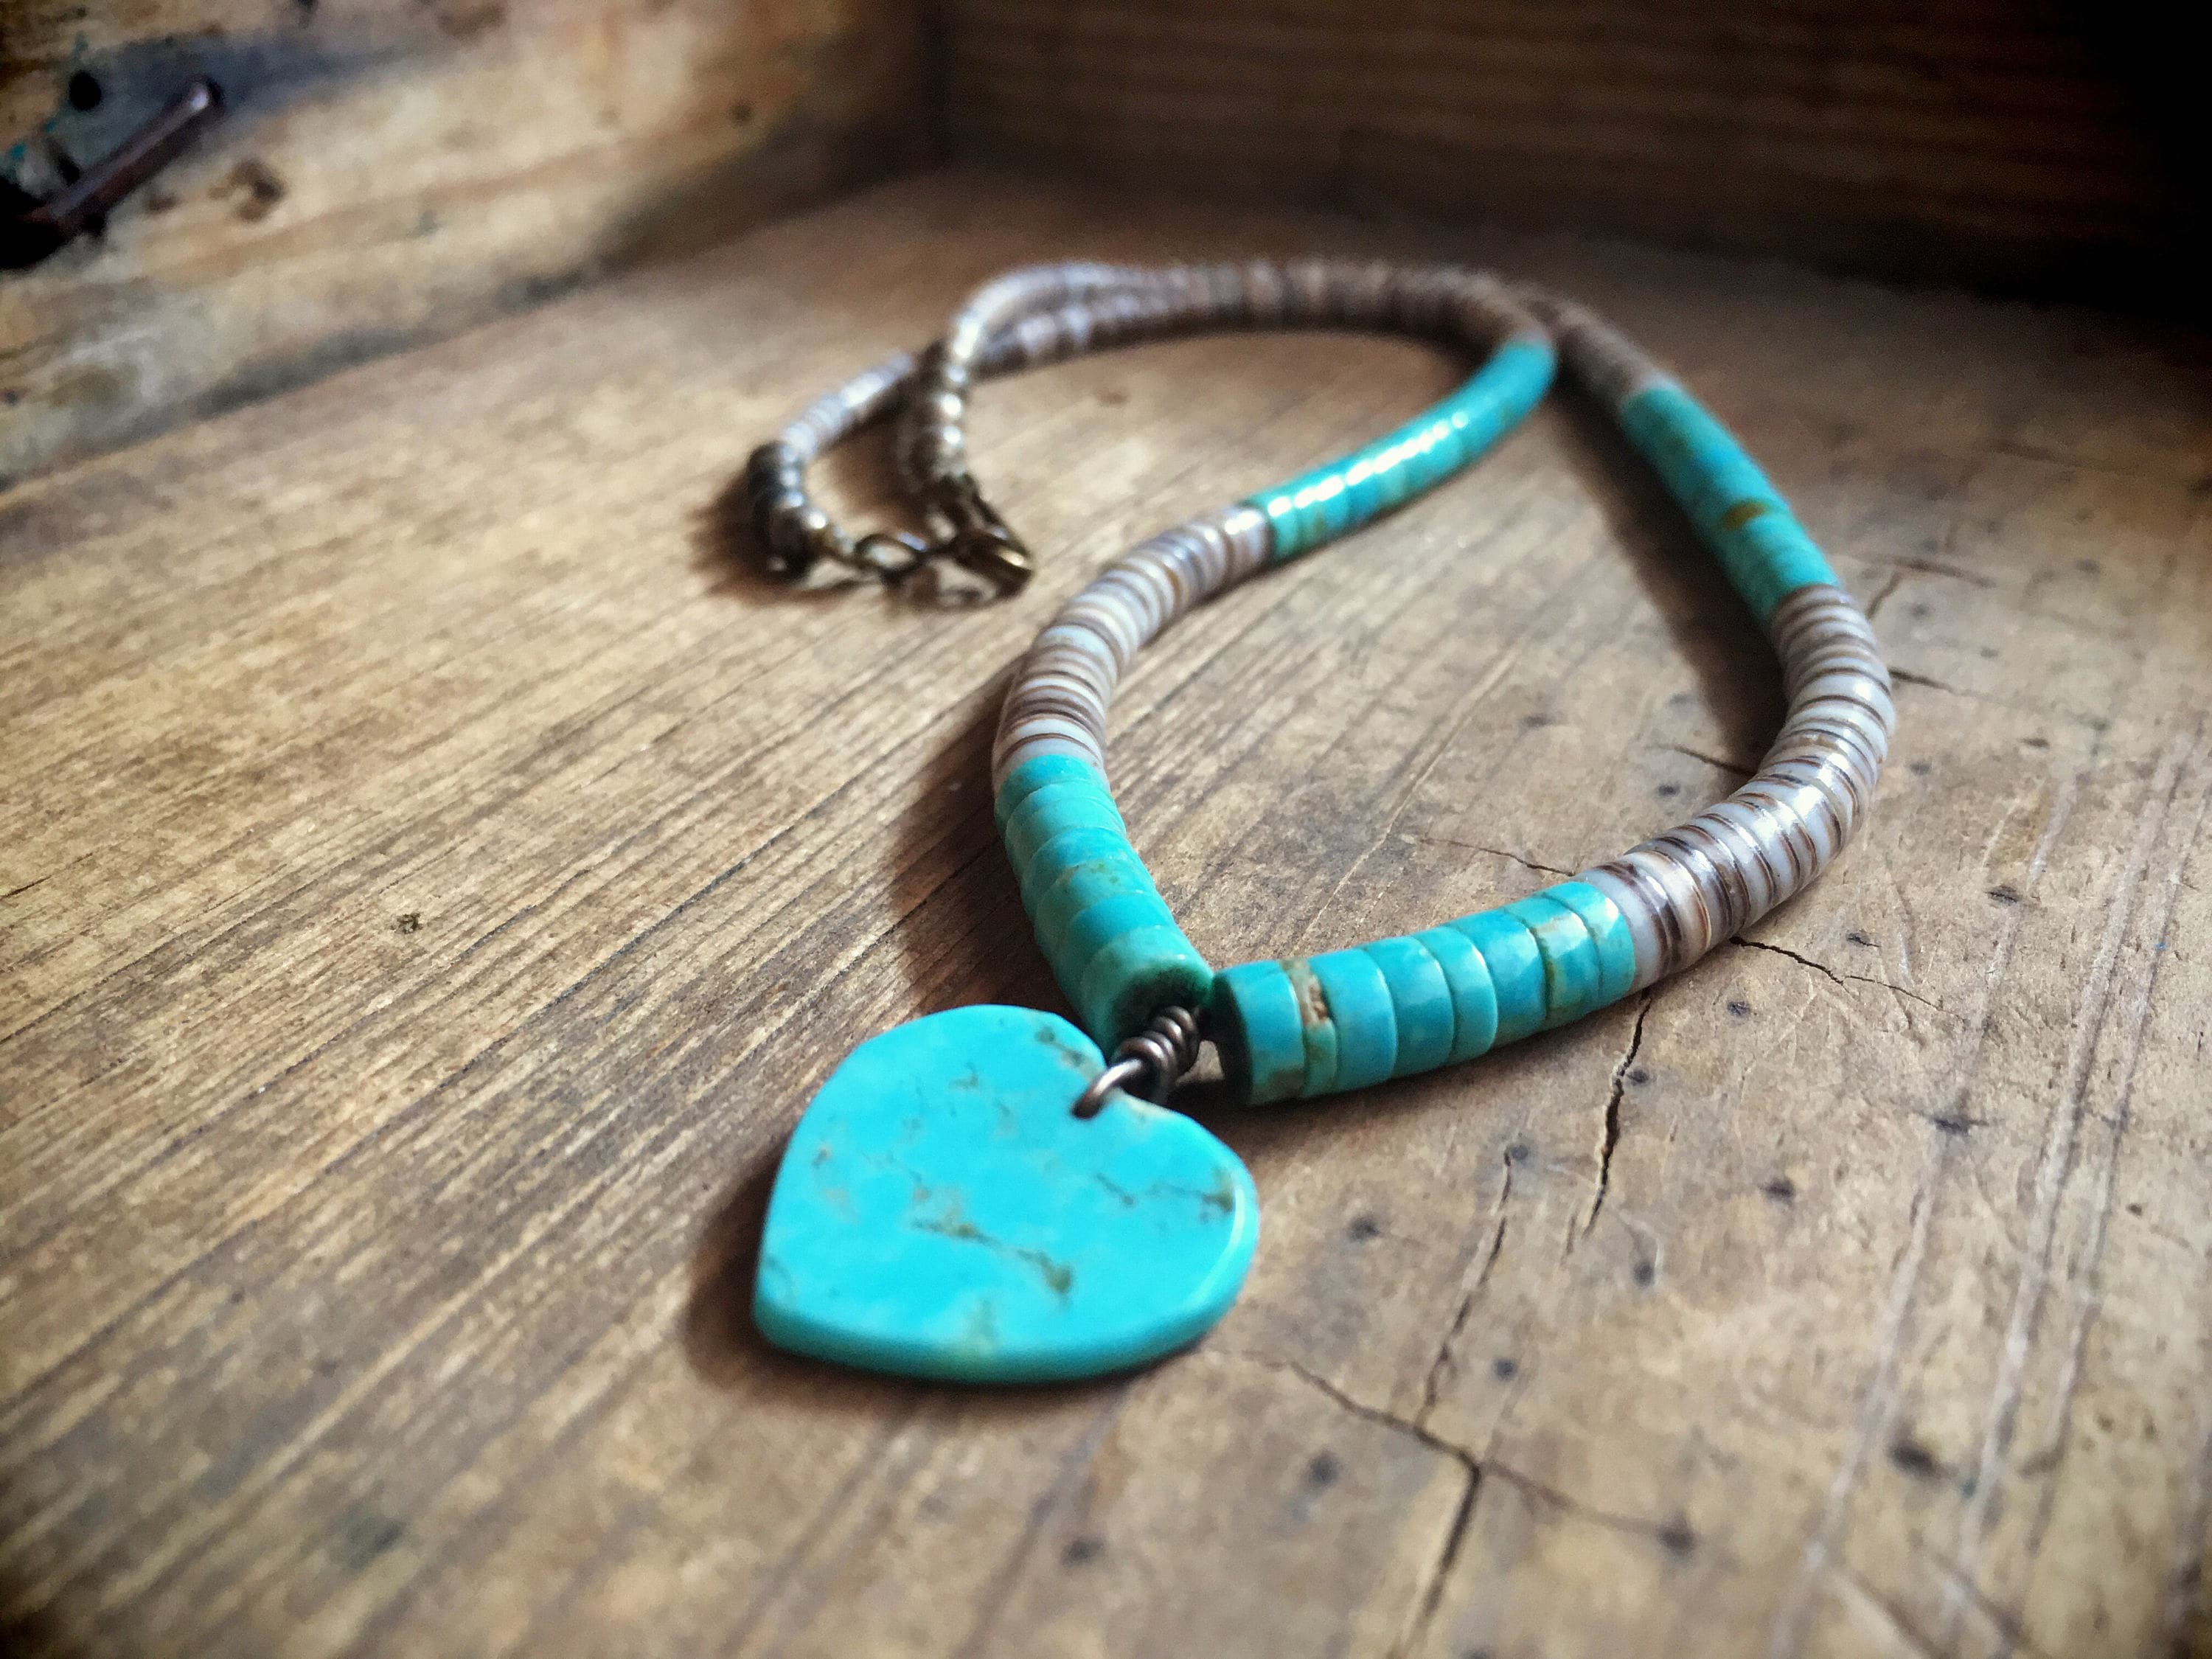 Vintage Southwestern Jewelry Turquoise Heart Heishi Necklace Native American Indian Jewelry